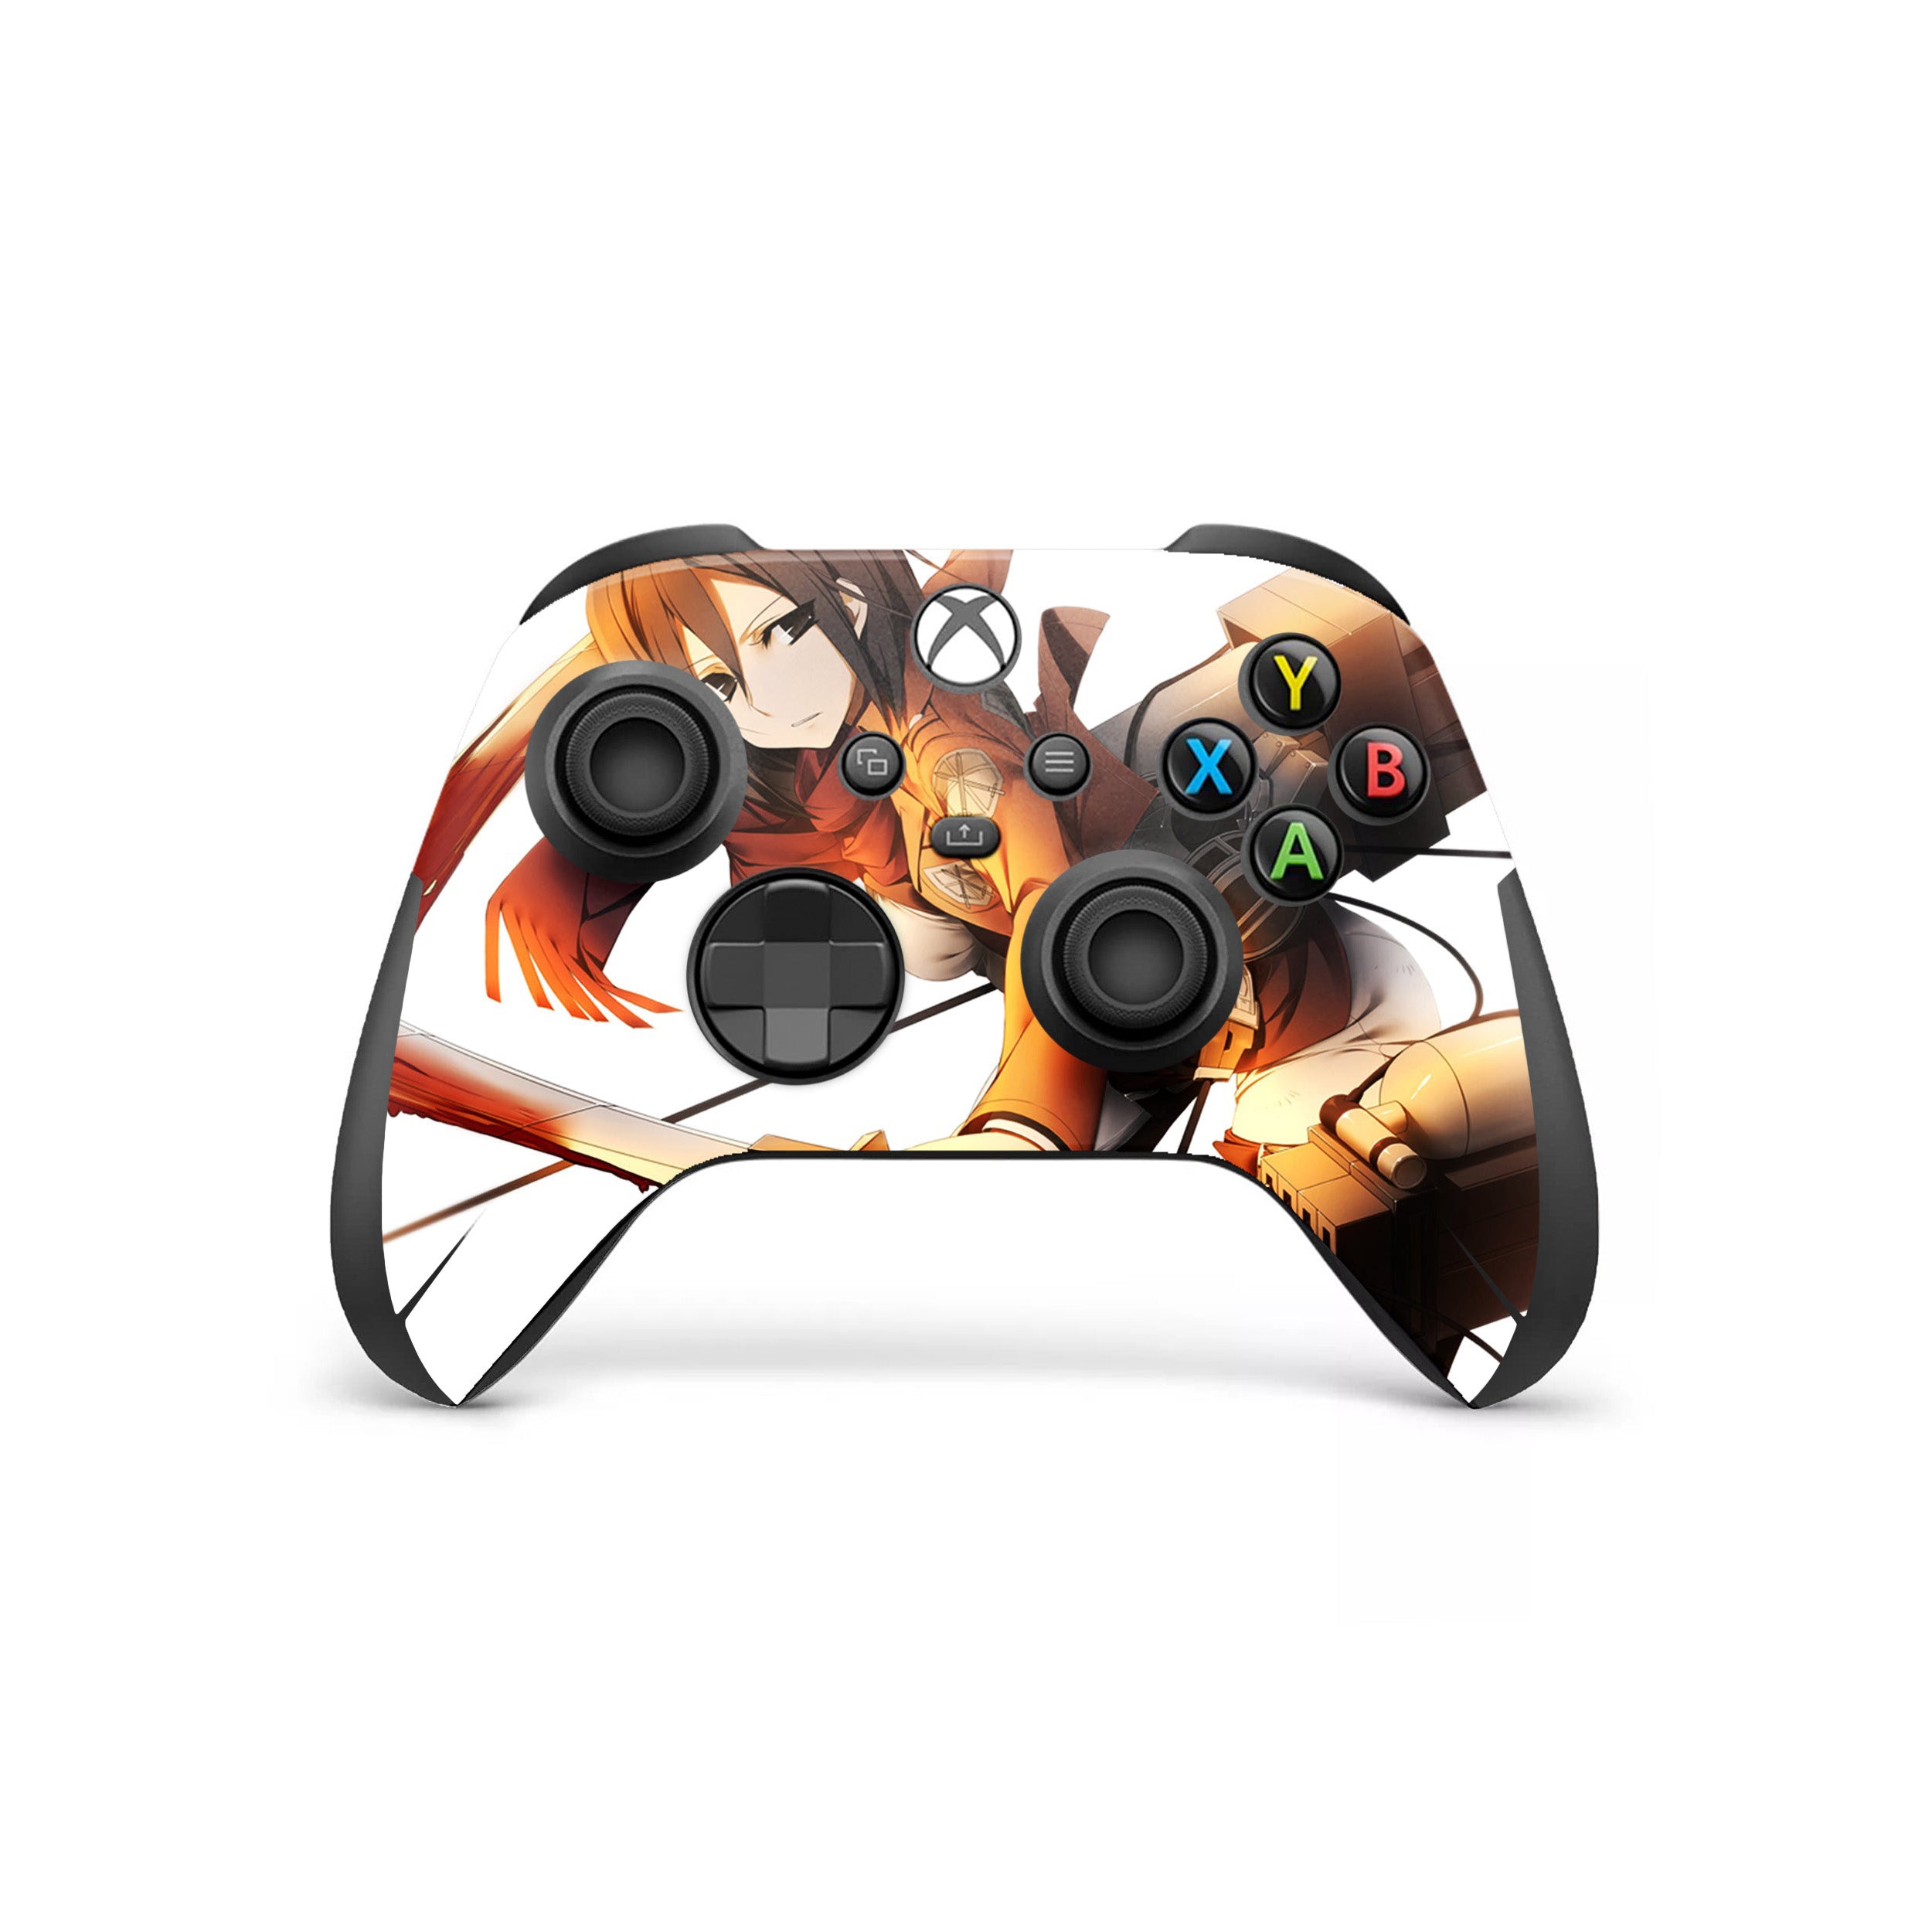 A video game skin featuring a Attack On Titan Mikasa Ackerman design for the Xbox Wireless Controller.